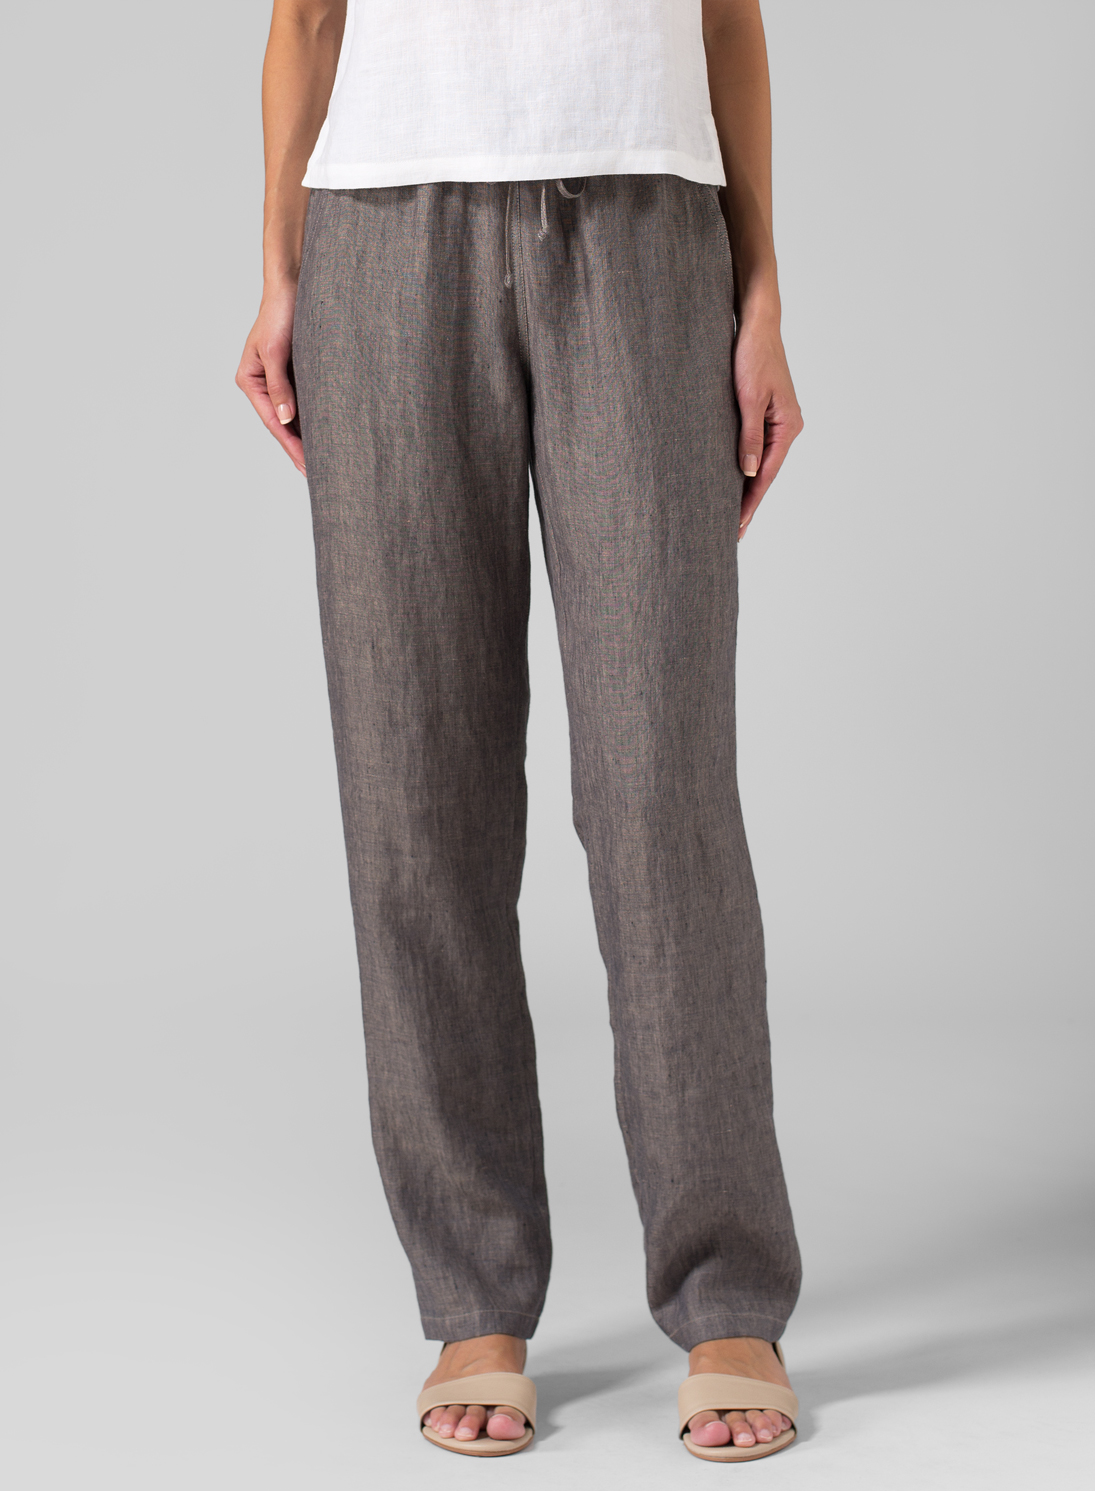 MISSY Clothing - Linen Casual Long Pants